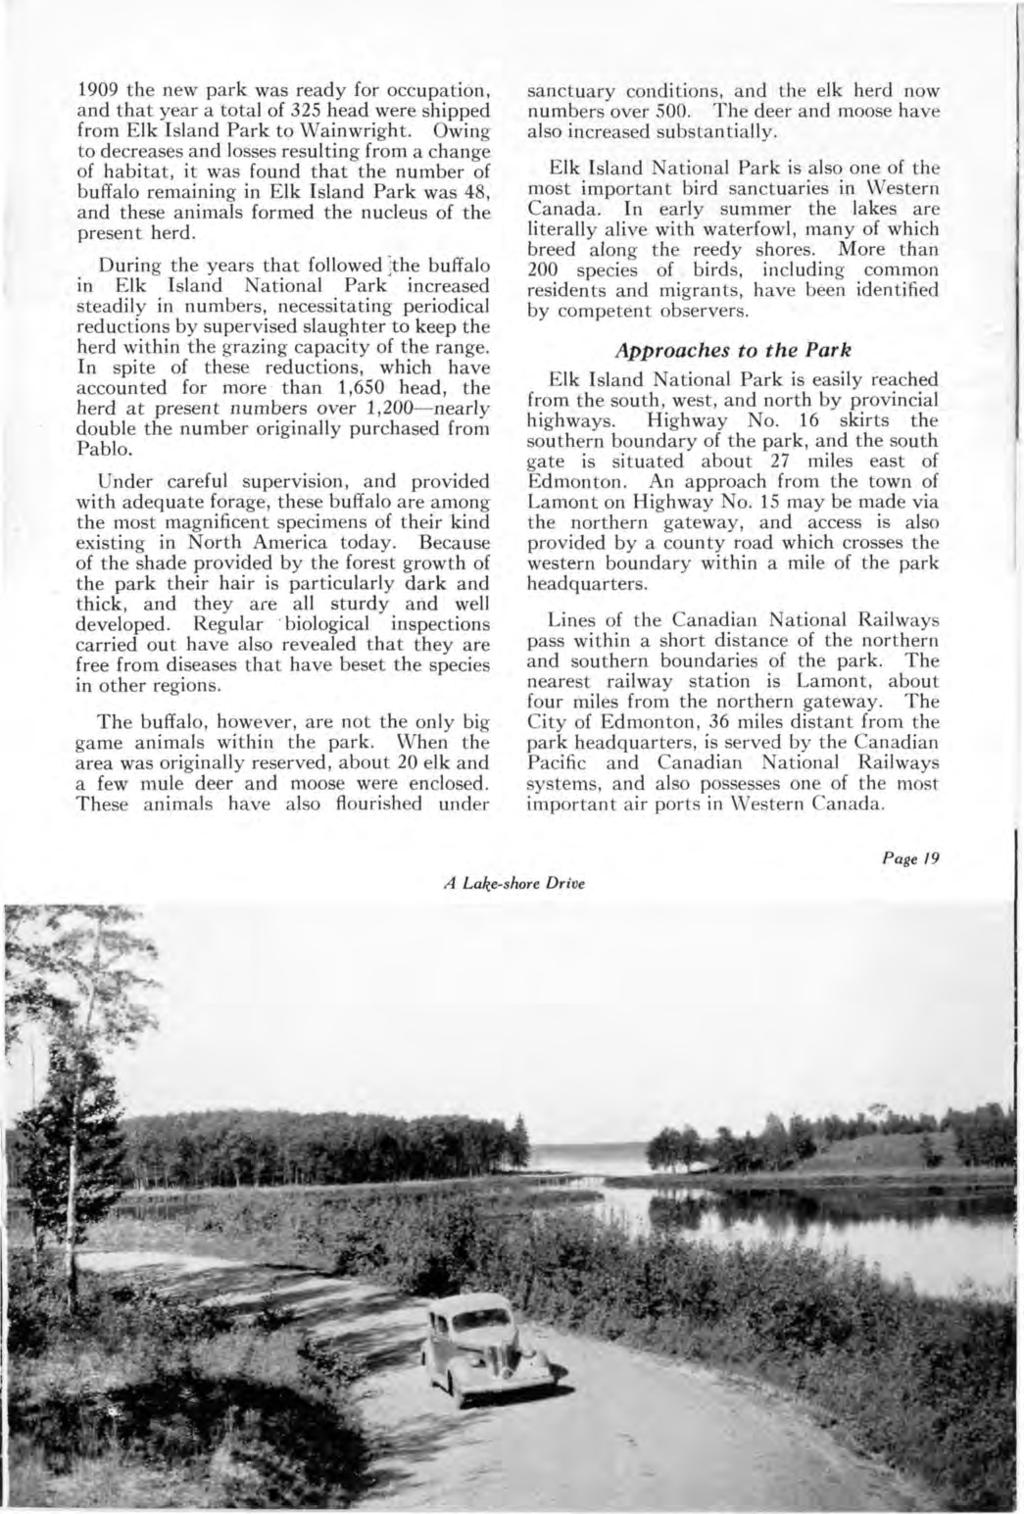 1909 the new park was ready for occupation, and that year a total of 325 head were shipped from Elk Island Park to Wainwright.